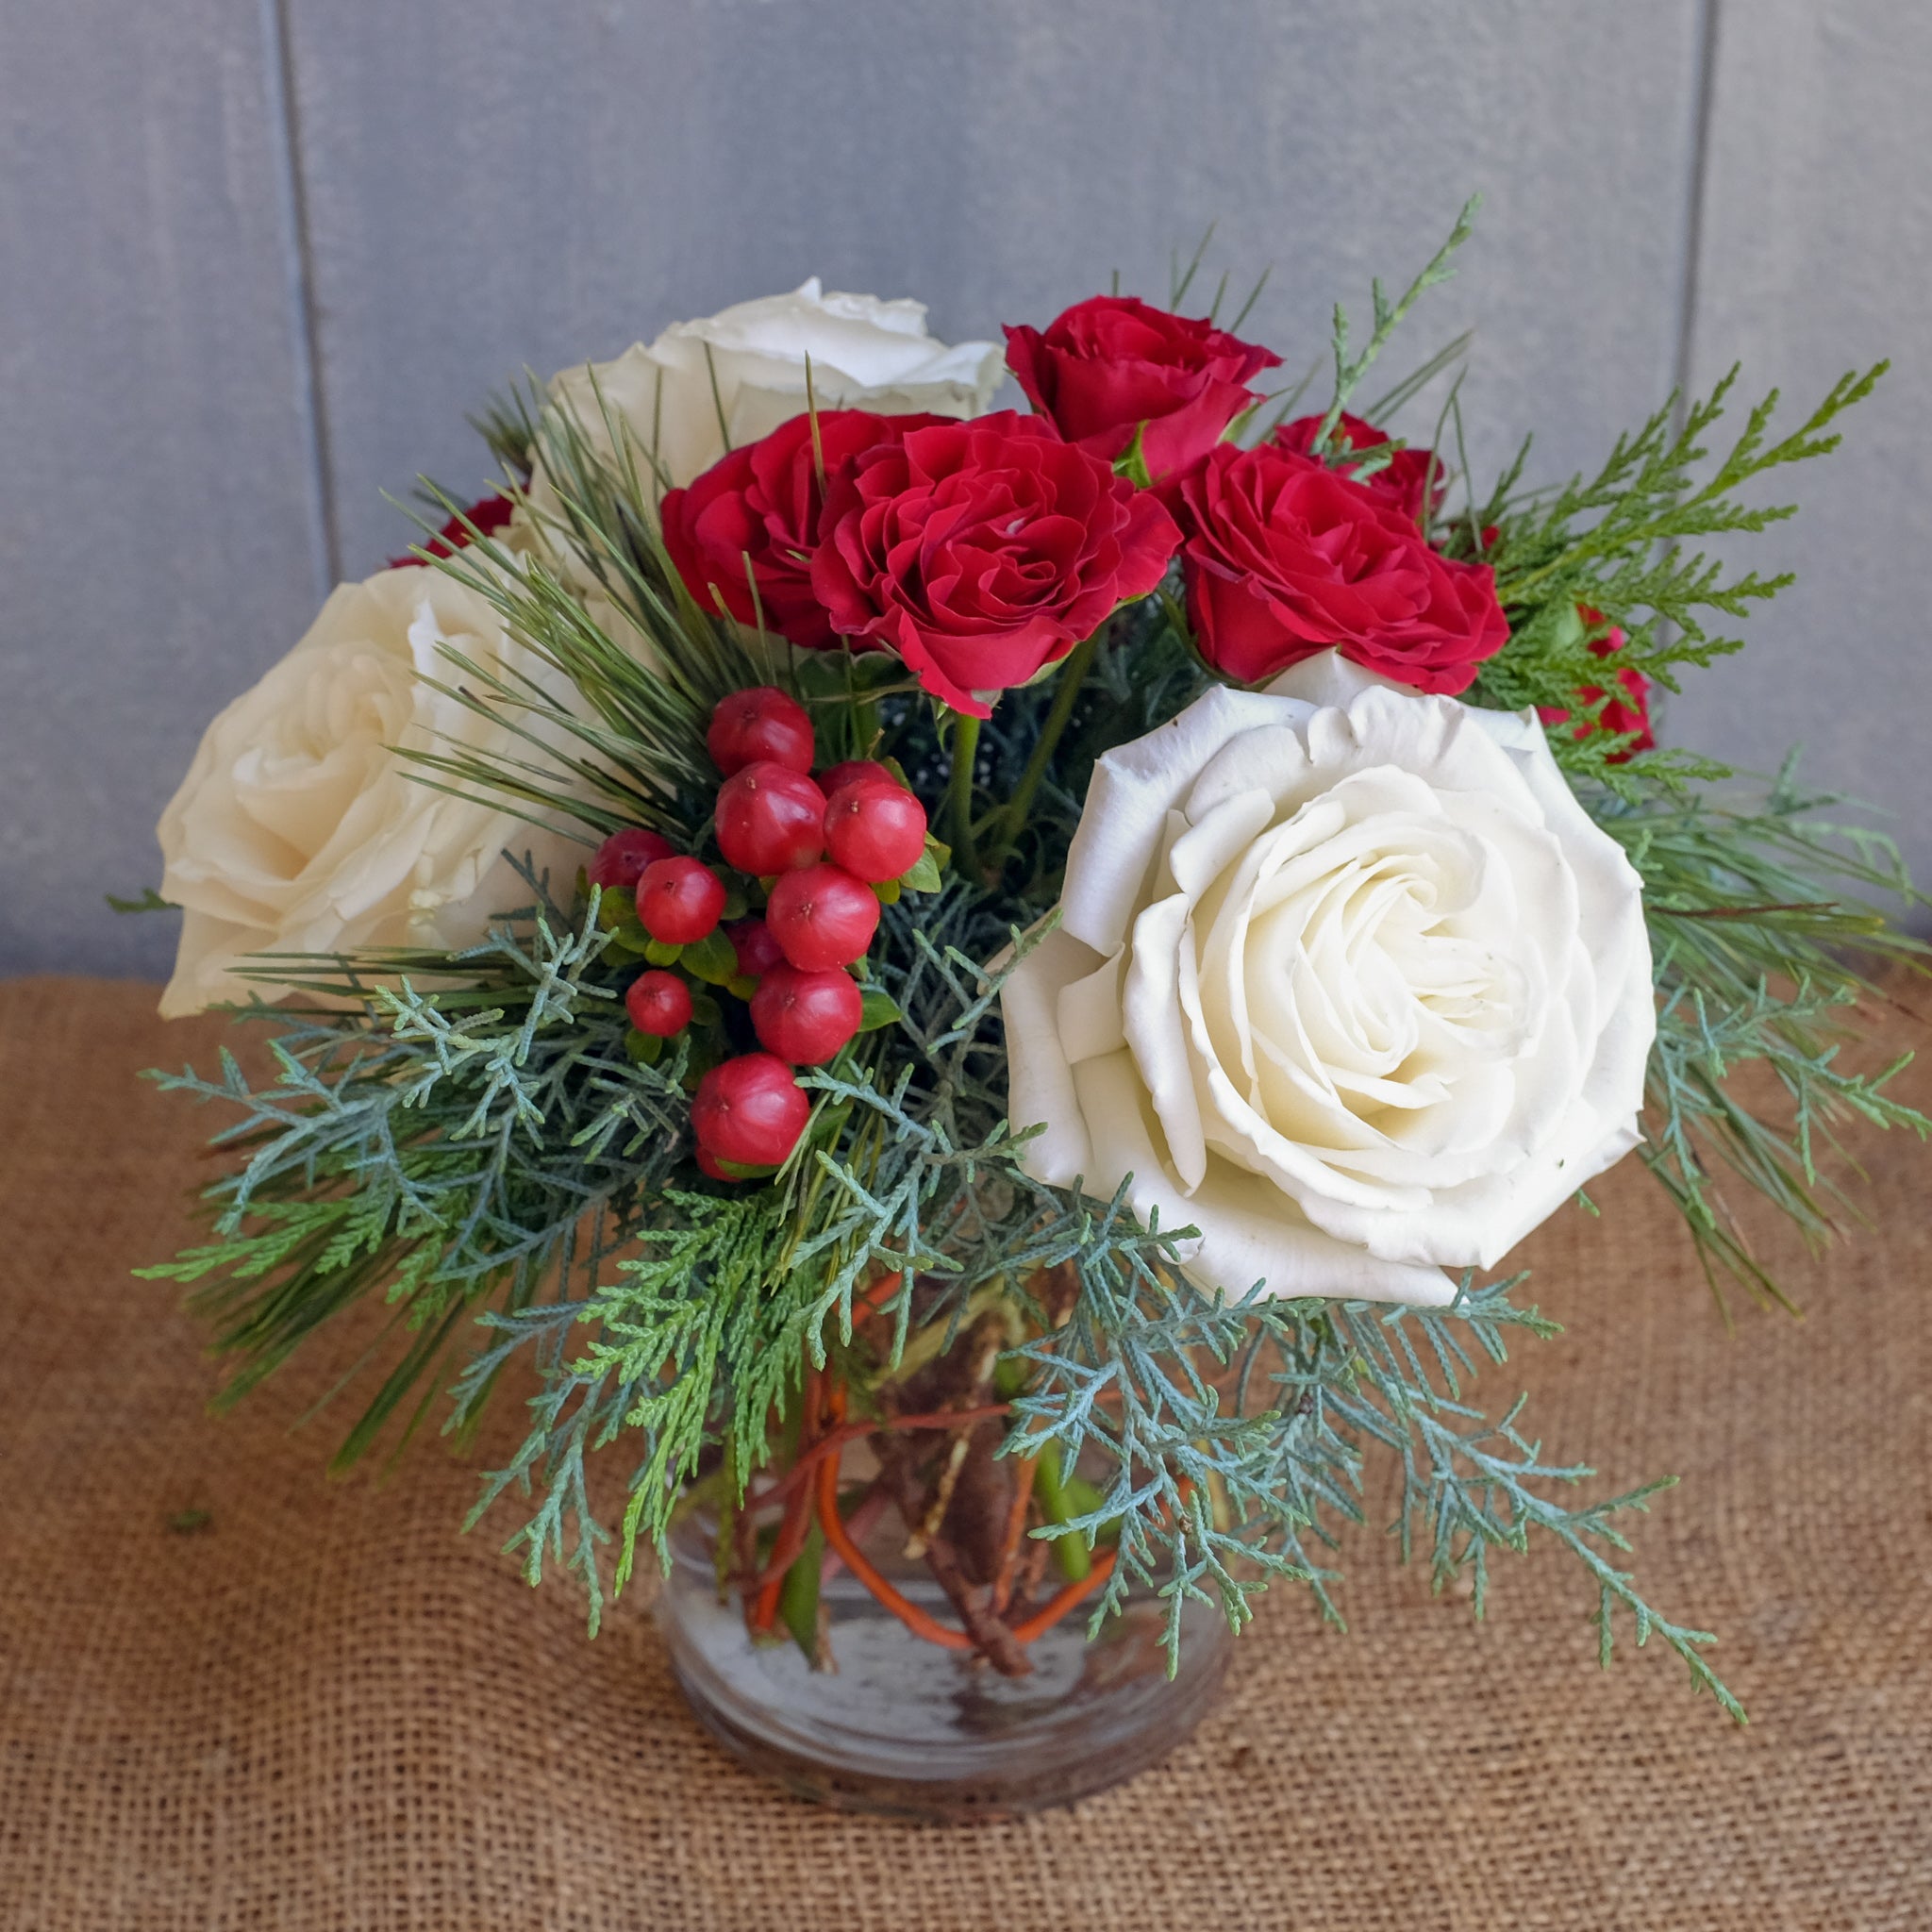 Vase of red and white flowers with christmas greens